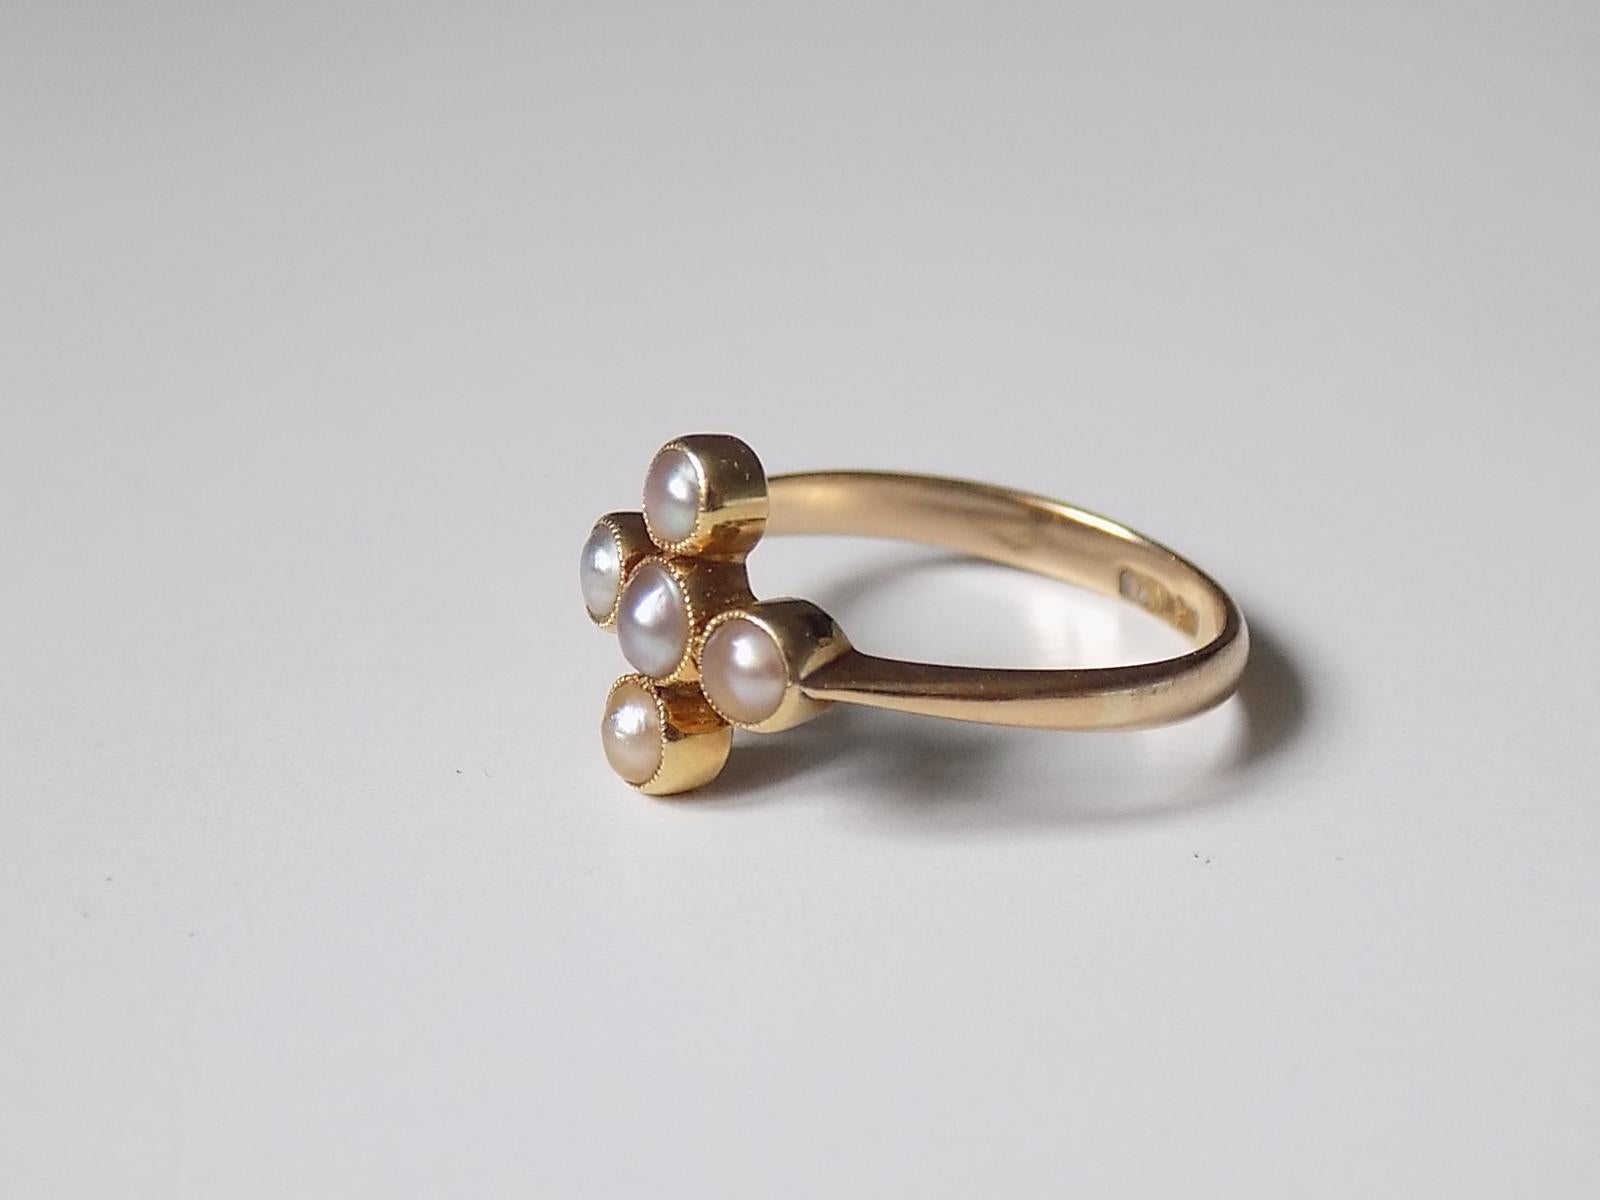 A Lovely Victorian c.1880 18 Carat Gold and split Pearl cross style ring. The pearls slight grey colour in closed back setting. English origin.
Size M UK, 6.5 US.
Height of the face 11mm.
Weight 2.5gr.
Marked for 18 Carat Gold.